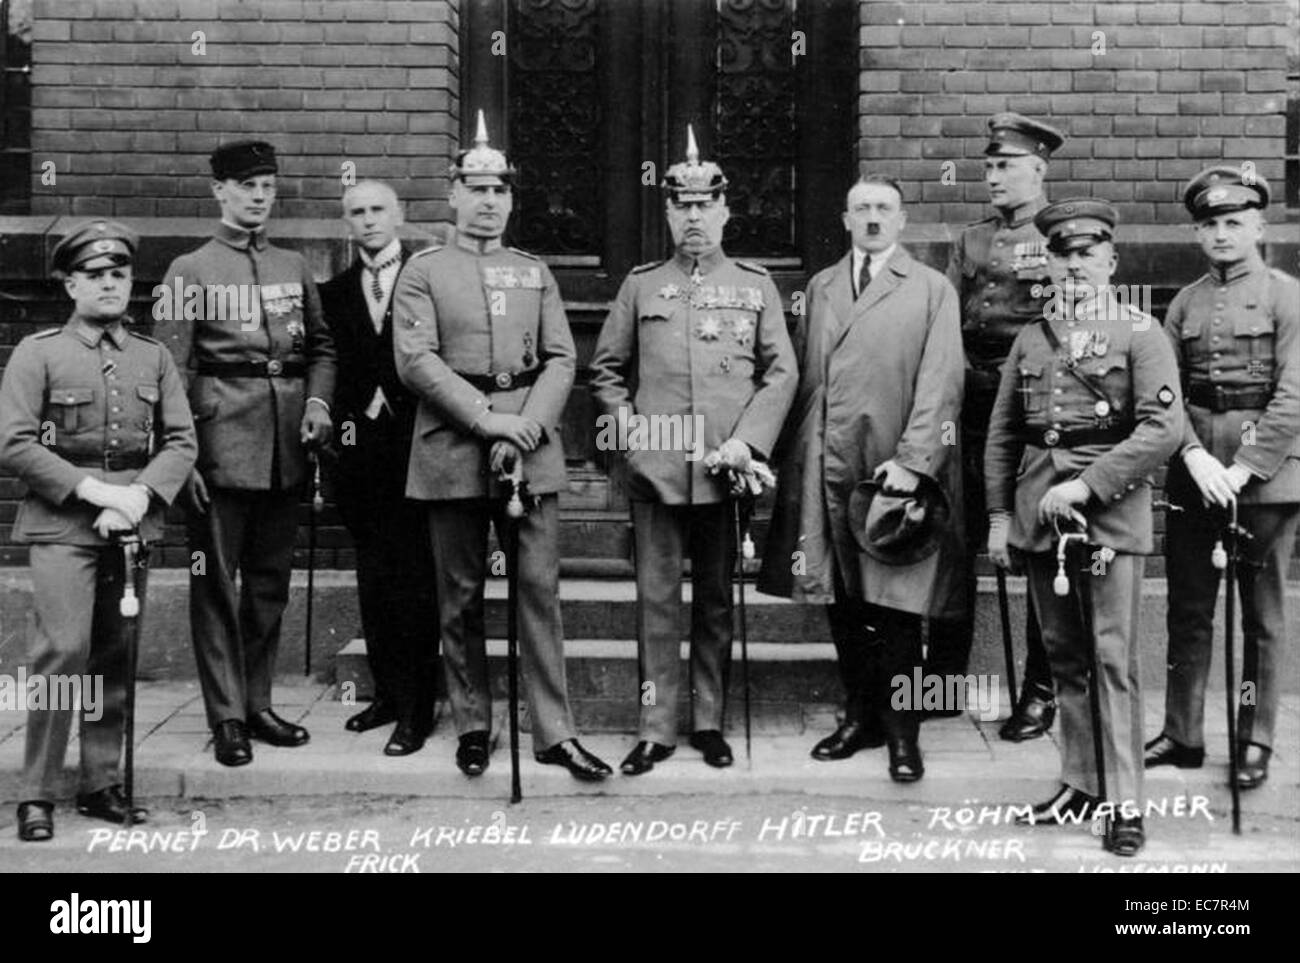 Defendants in the Beer Hall Putsch Trial. From left to right: Pernet, Weber, Frick, Kiebel, Ludendorff, Hitler, Bruckner, Röhm, and Wagner. The Putsch was a failed attempt by Hitler and the Nazi Party to seize power in Munich. Stock Photo